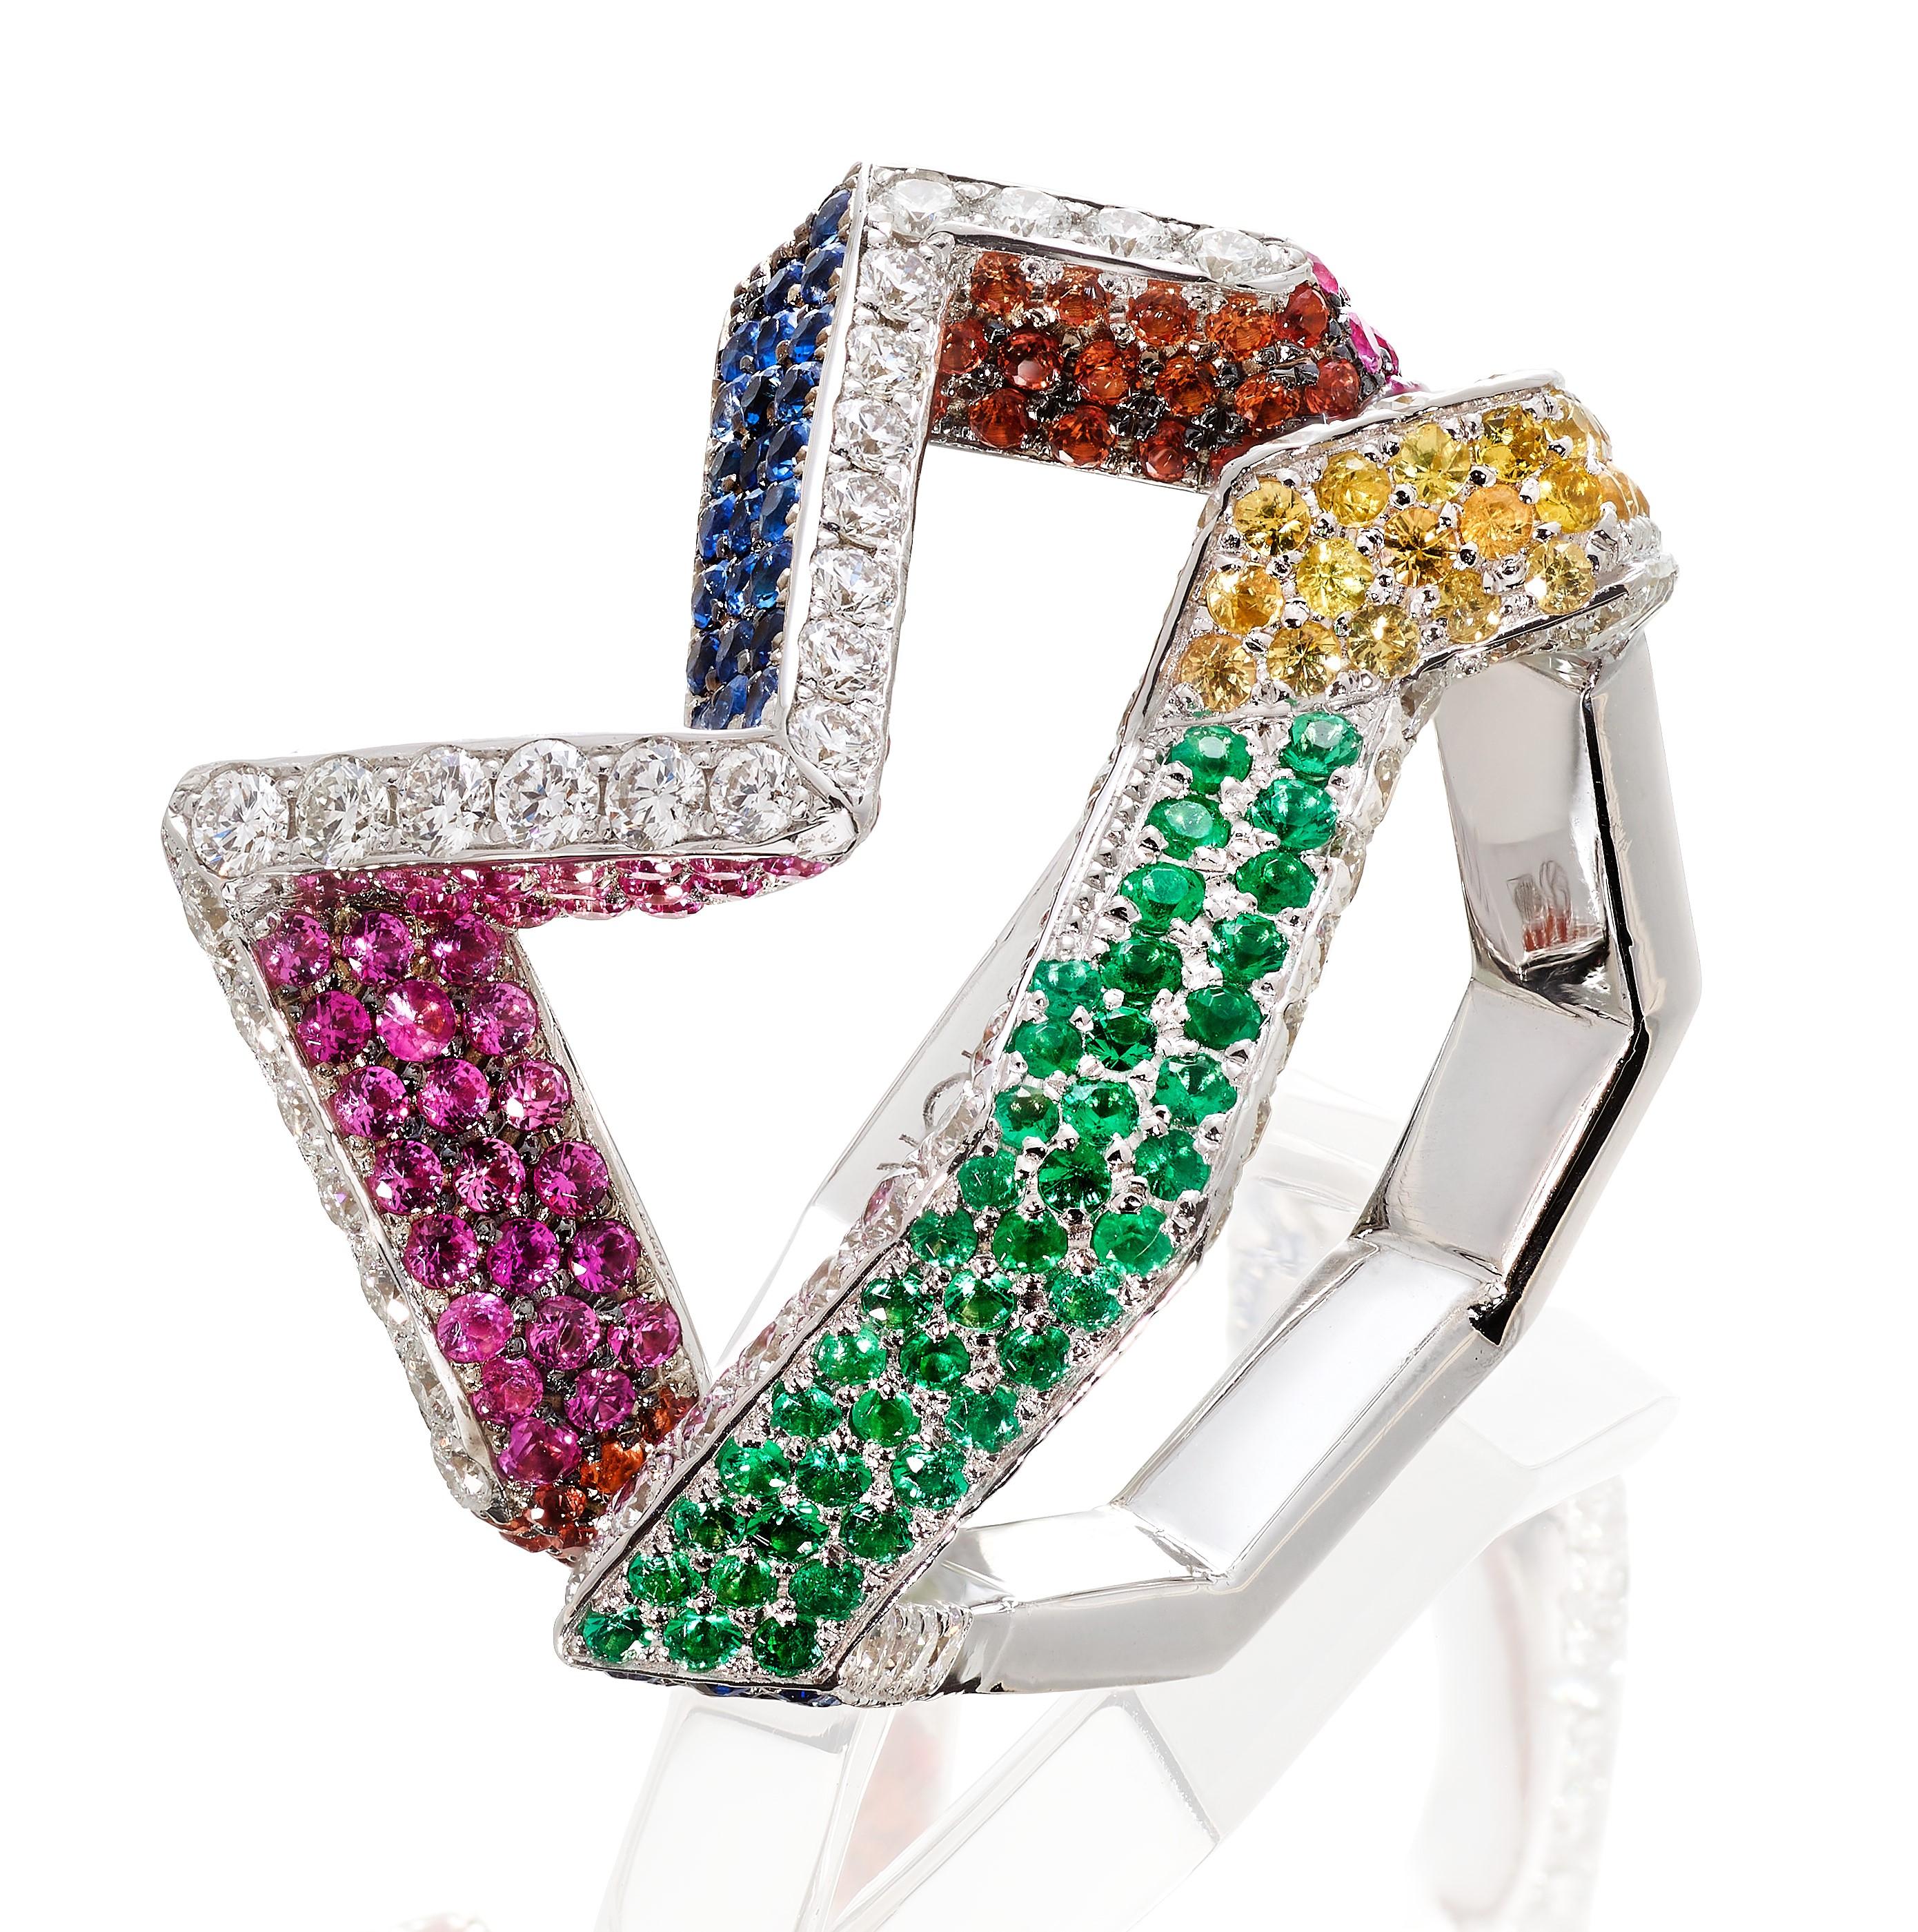 Rosior Contemporary Cocktail Ring set in White Gold with:
- 85 F Color, VVS Clarity Diamonds with 0,79 ct;
- 42 Emeralds with 0,18 ct;
- 52 Pink Sapphires with 0,34 ct;
- 54 Blue Sapphires with 0,30 ct;
- 16 Purple Sapphires with 0,07 ct;
- 85